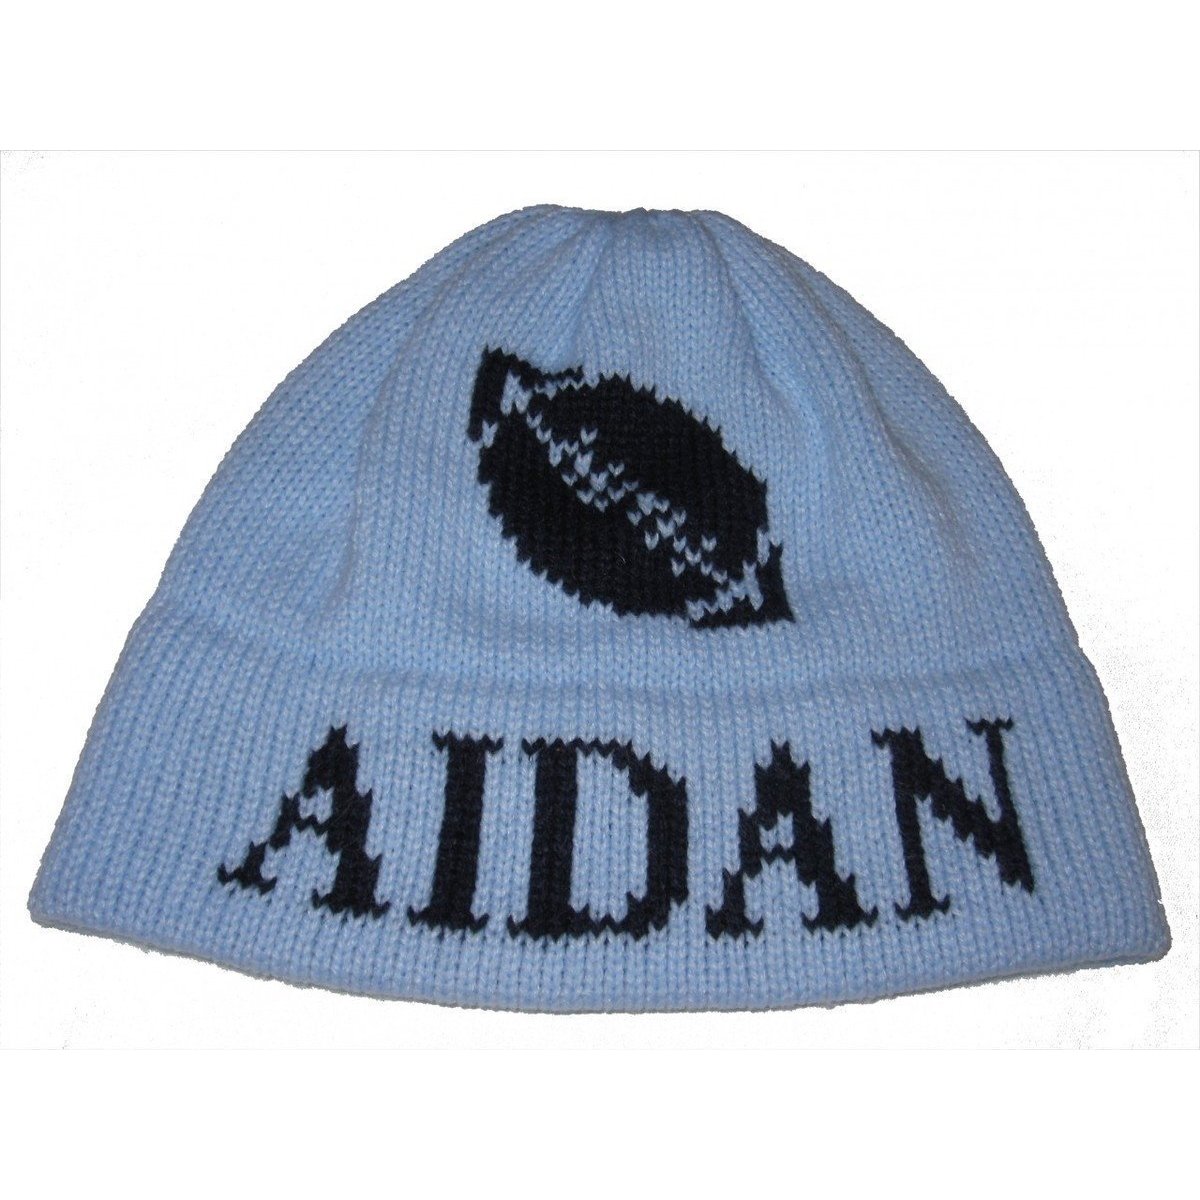 Football Personalized Knit Hat-Hats-Jack and Jill Boutique